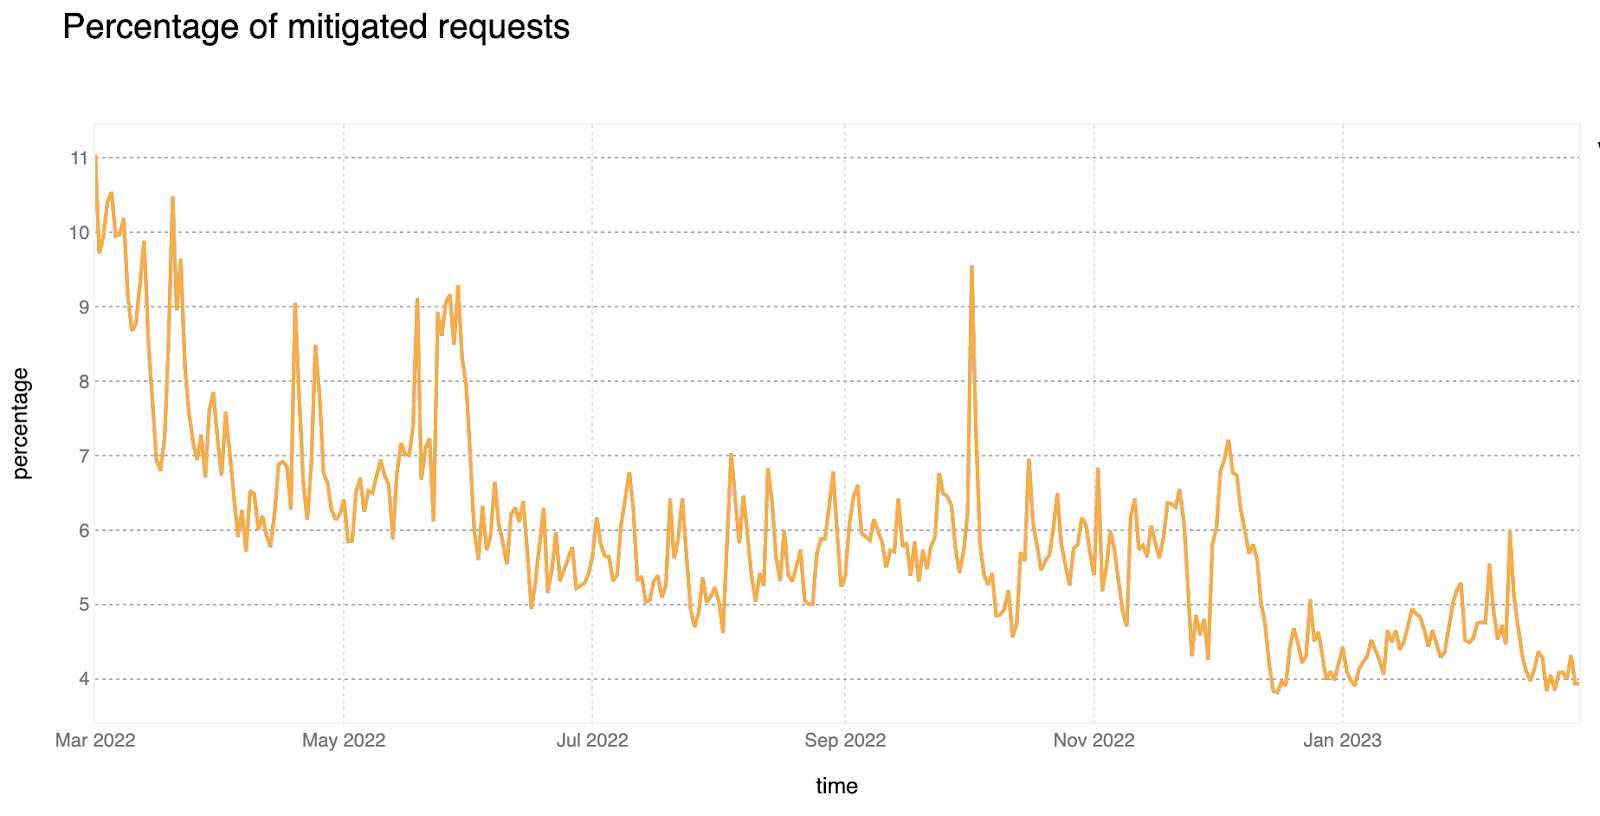 Percentage of mitigated HTTP requests over the last 12 months